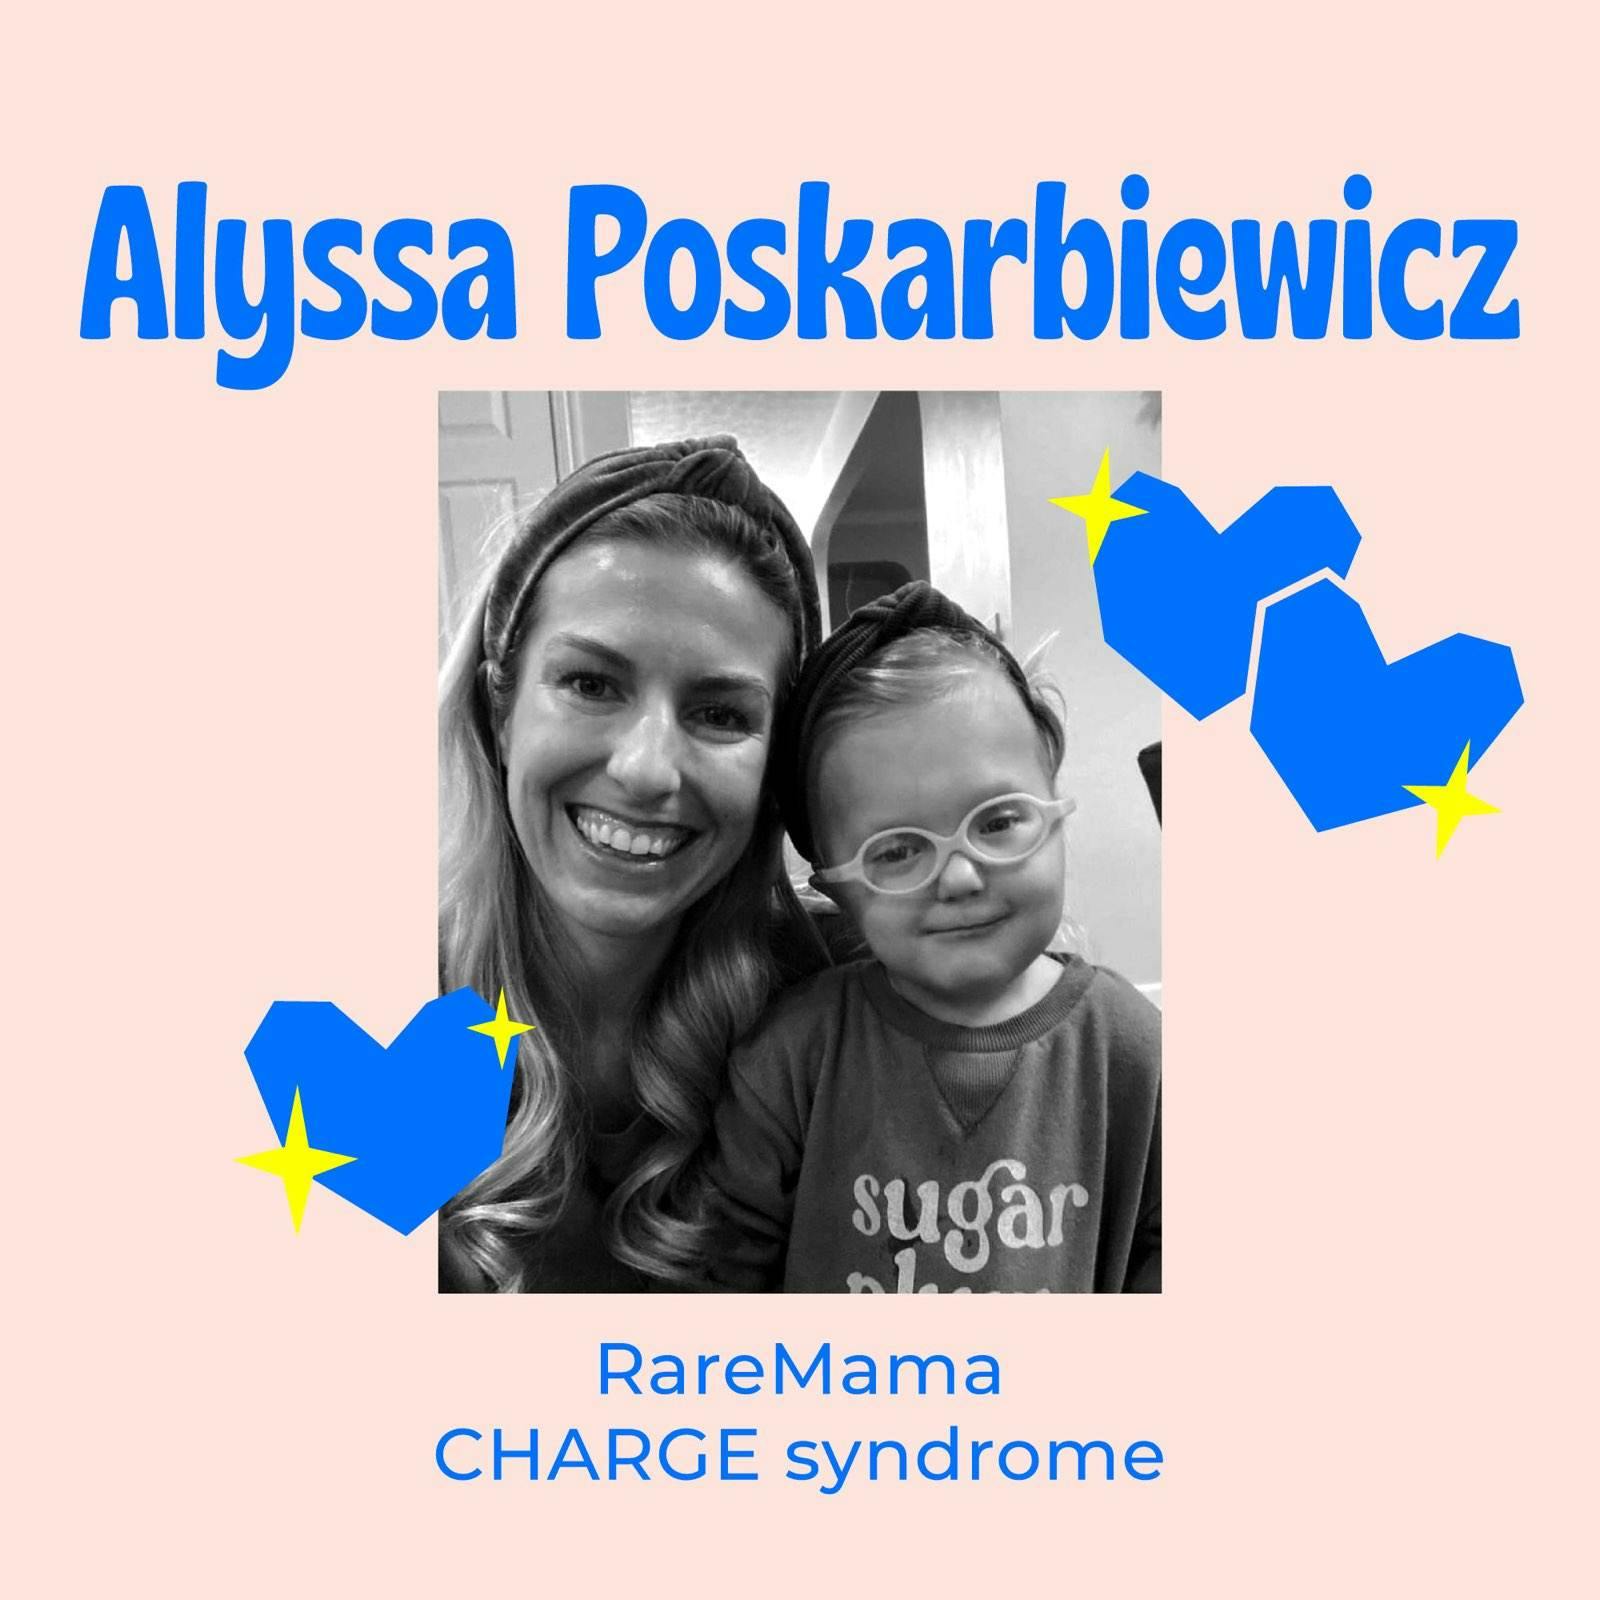 Real Rare Mama Shop Talk – Deciding What We Share About Our Lives and Recognizing How Far We’ve Come with Each Passing Year with Alyssa Poskarbiewicz CHARGE Syndrome Mom